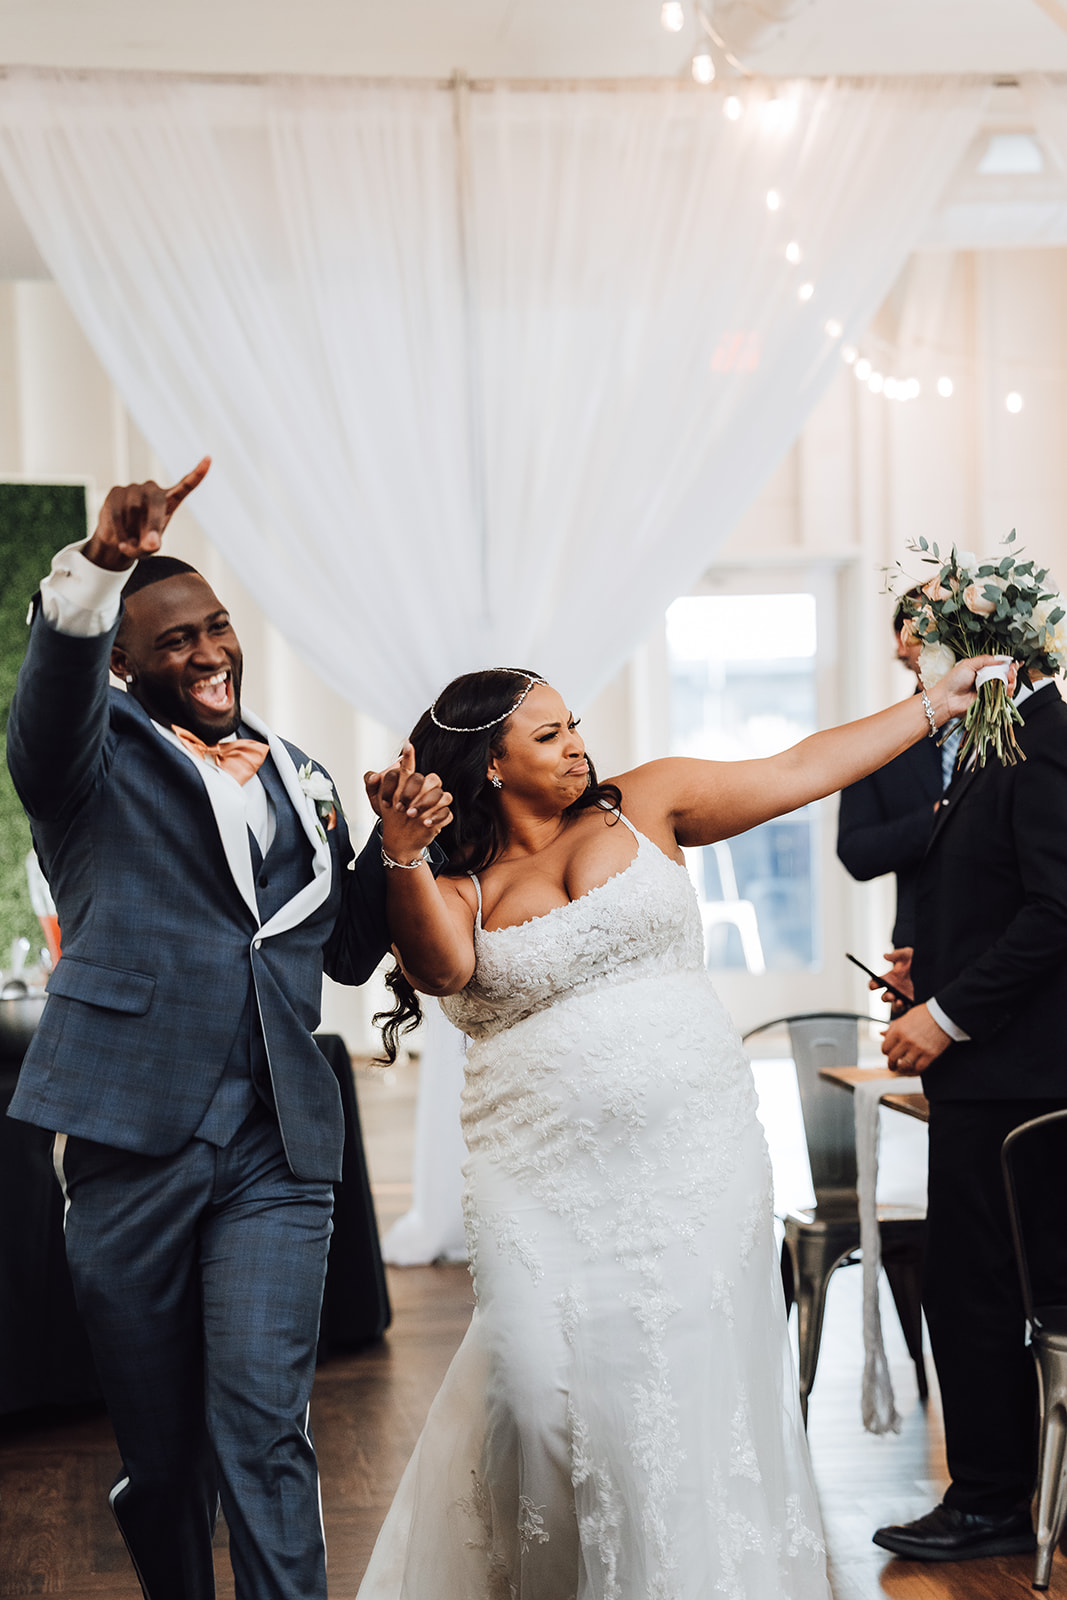 Newlyweds celebrate while entering their reception